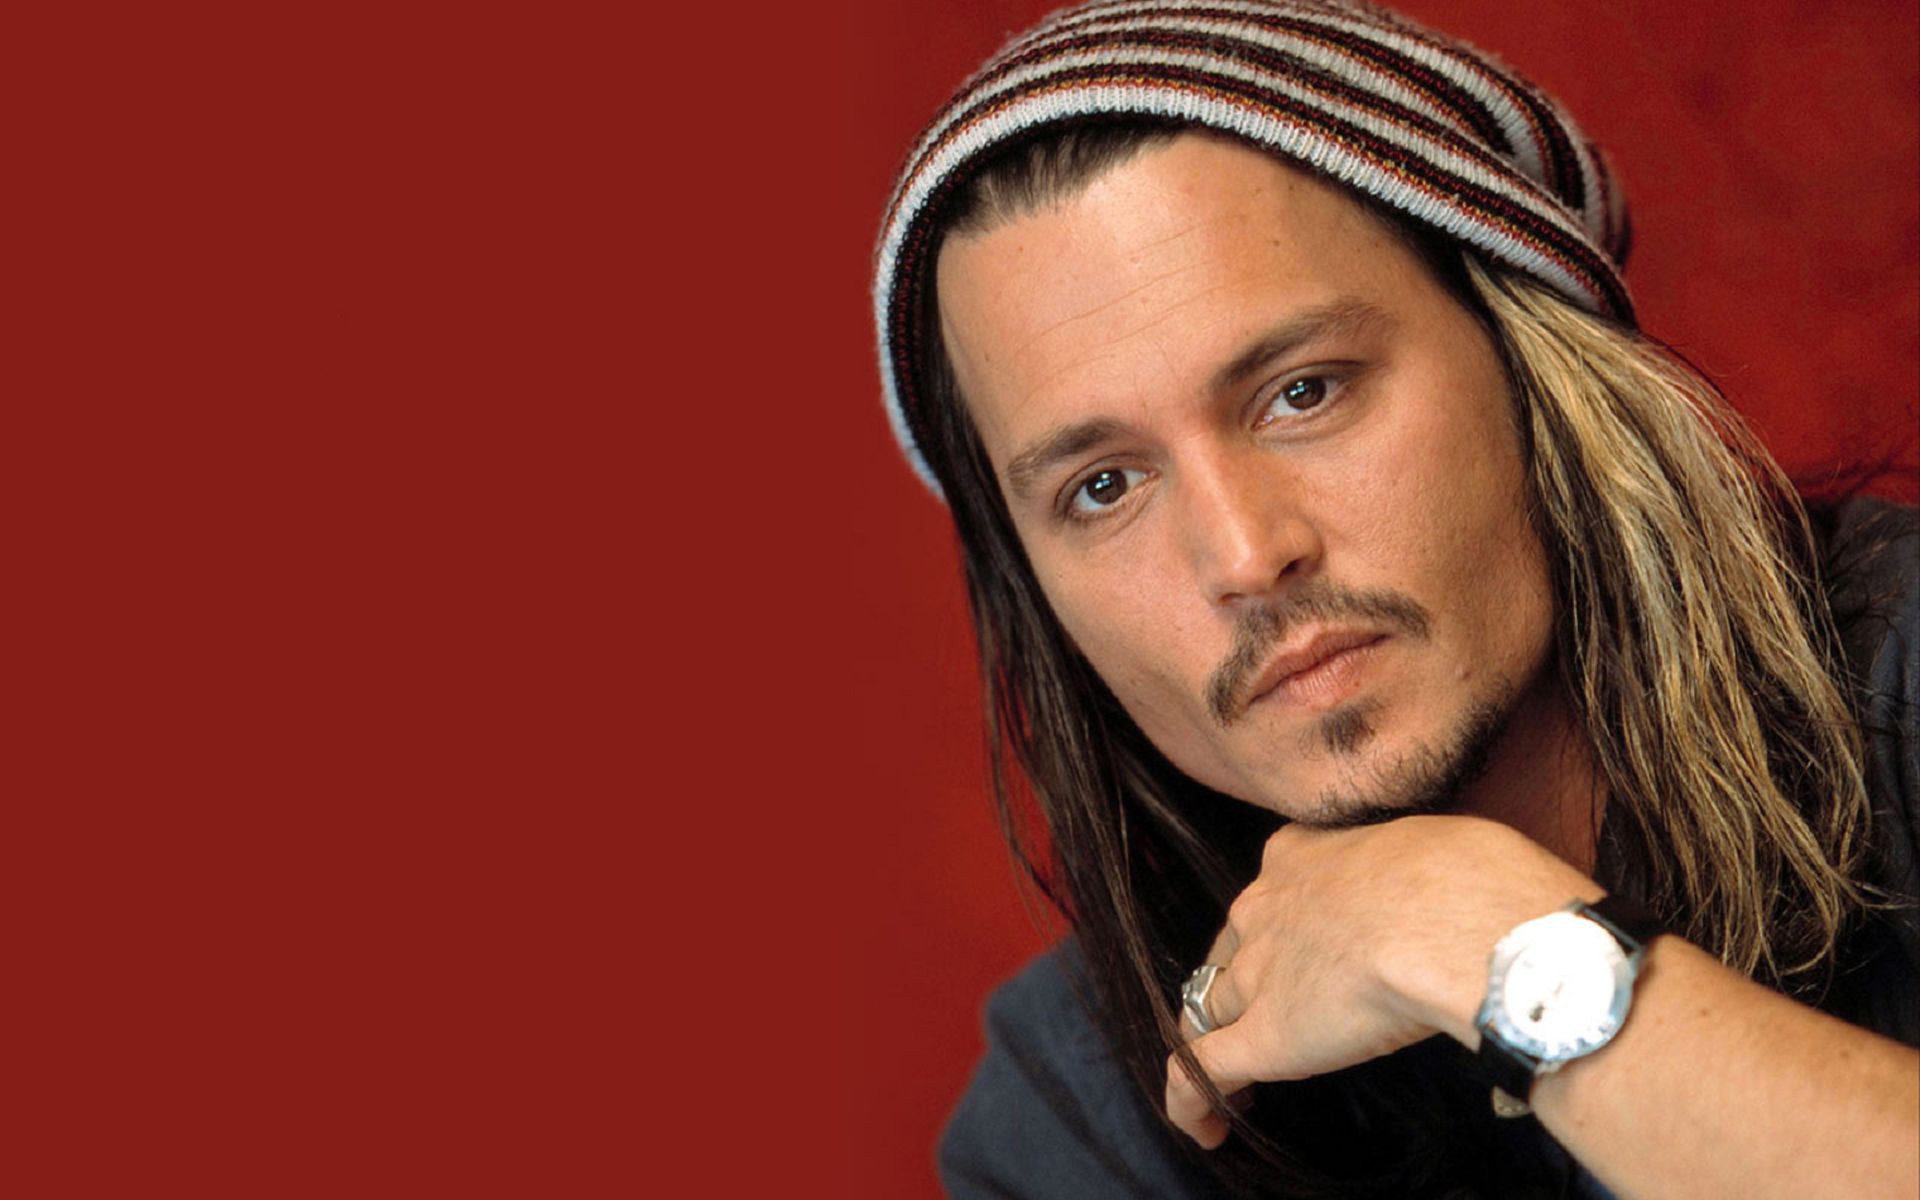 new style johnny depp download hd picture